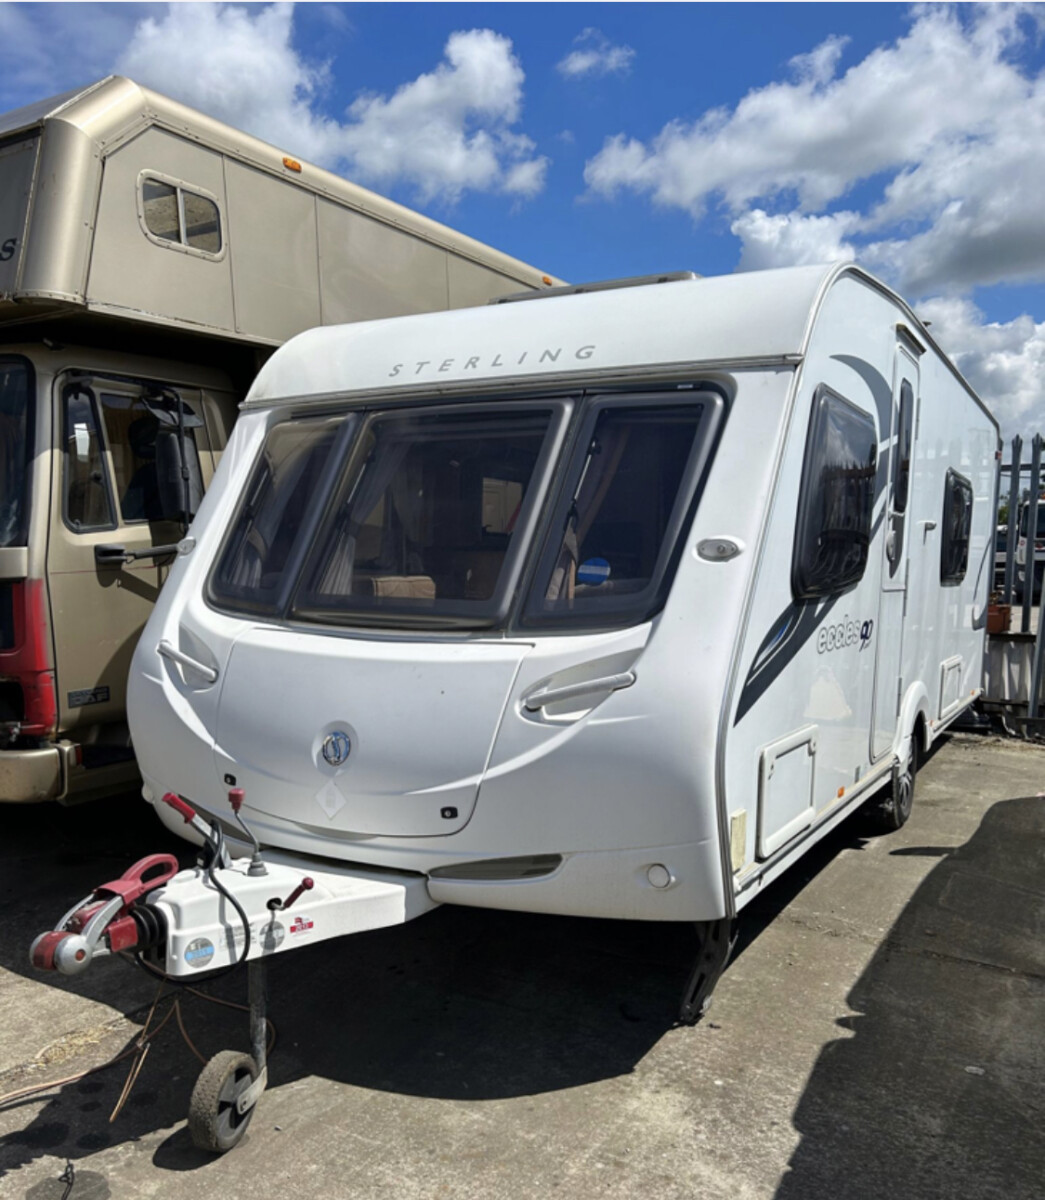 SOLD 2010 Sterling Eccles Ruby fixed bed single axle caravan $34995